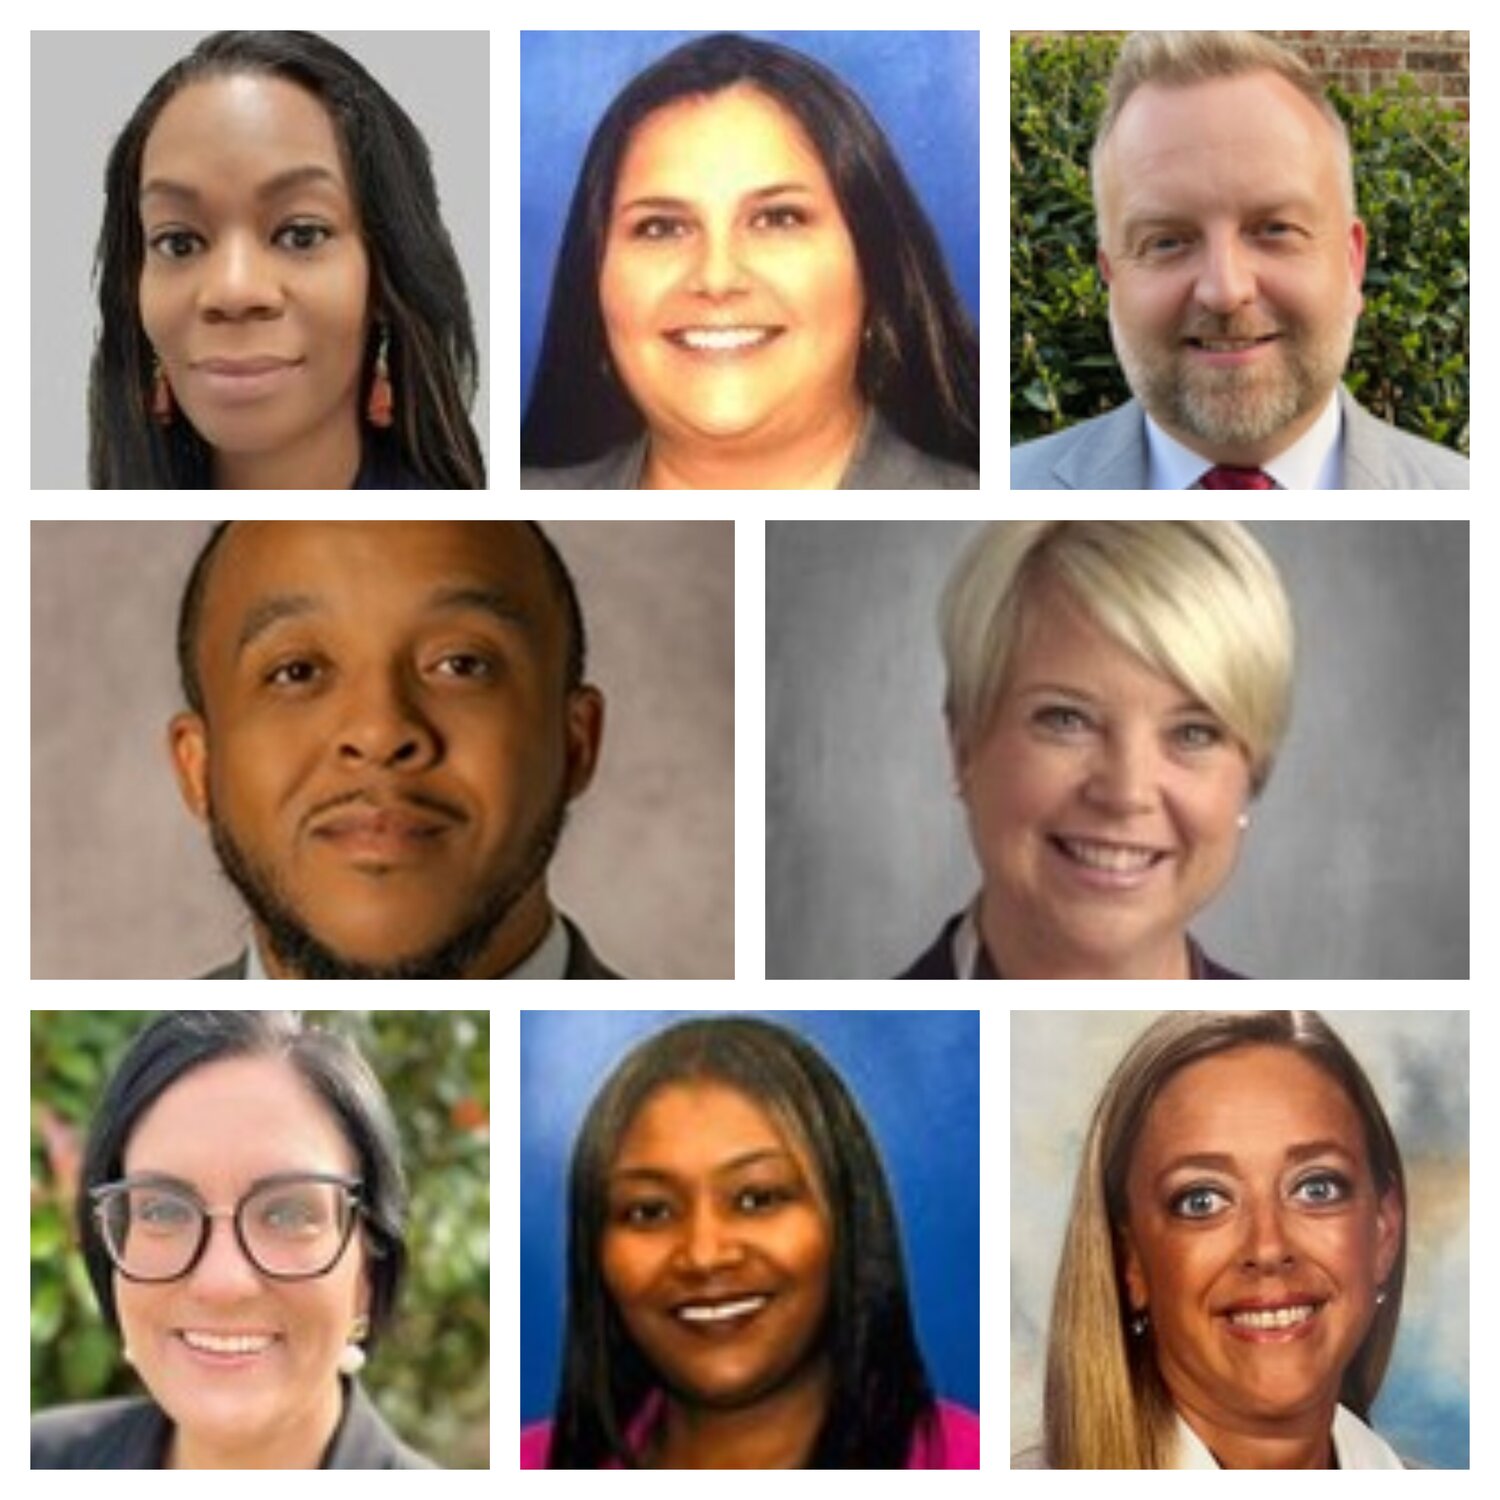 New principals assigned to schools in Cumberland County include, top row from left, Timberley Jones, Westarea Elementary; Sharley Ditmore, Max Abbot Middle; Shawn O'Conner, South View Middle; second row, Marcus Stewart, Sunnyside Elementary, and Rachel Andress, William H. Owen Elementary; bottom row,  Amanda Hether, Margaret Willis Elementary; Ebony Forte-Johnson, Manchester Elementary; and Brook Griffie, Beaver Dam Elementary.